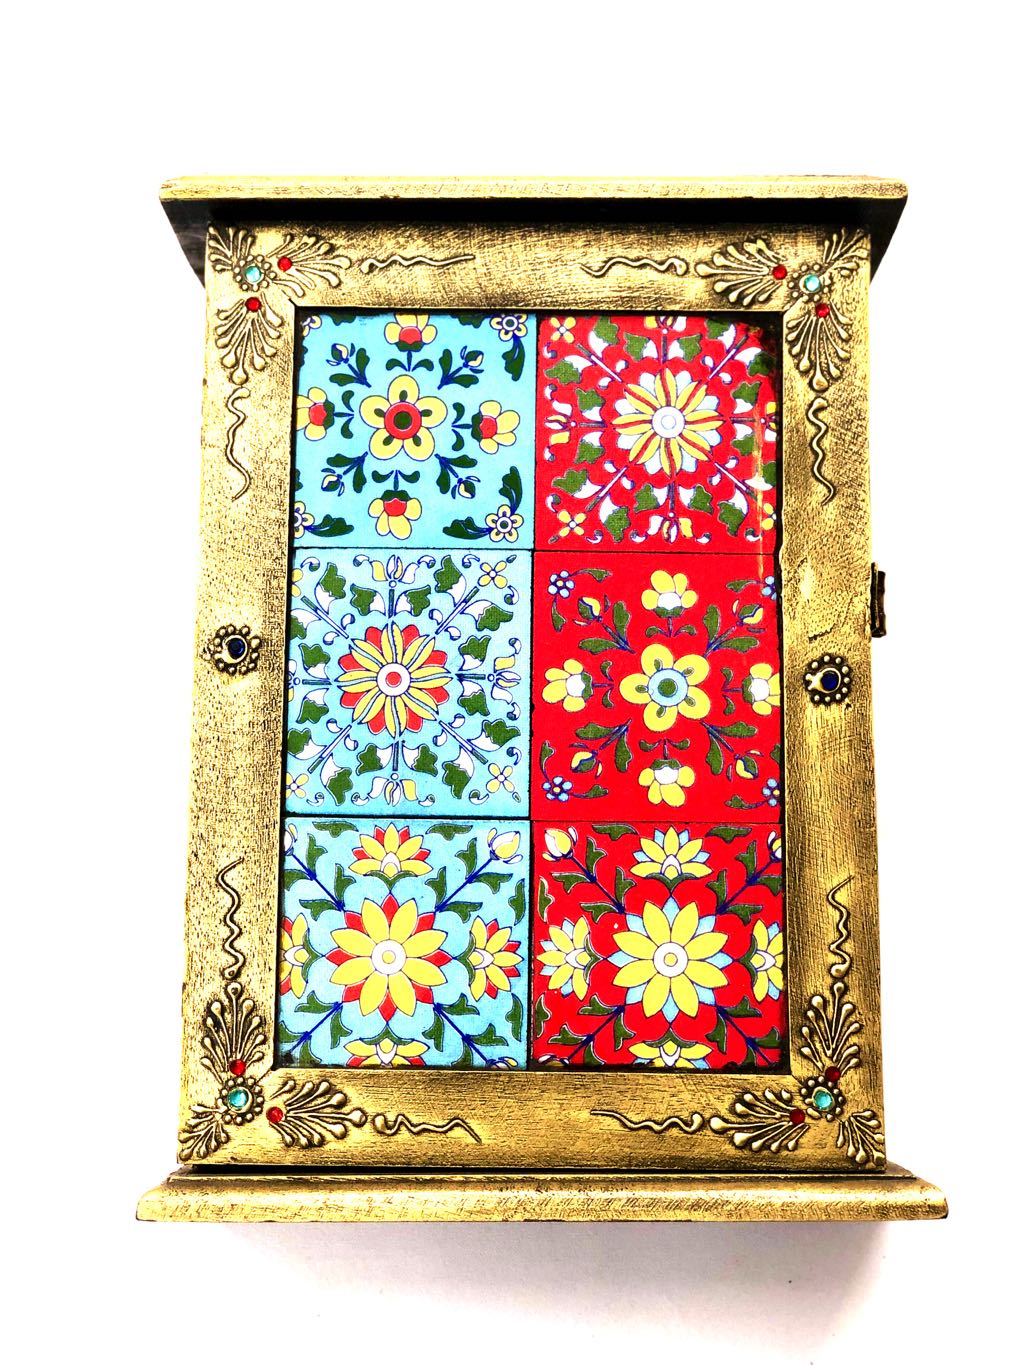 Blue Pottery Tiles Fitted On Wooden Box Door Style Key Hanger Tamrapatra